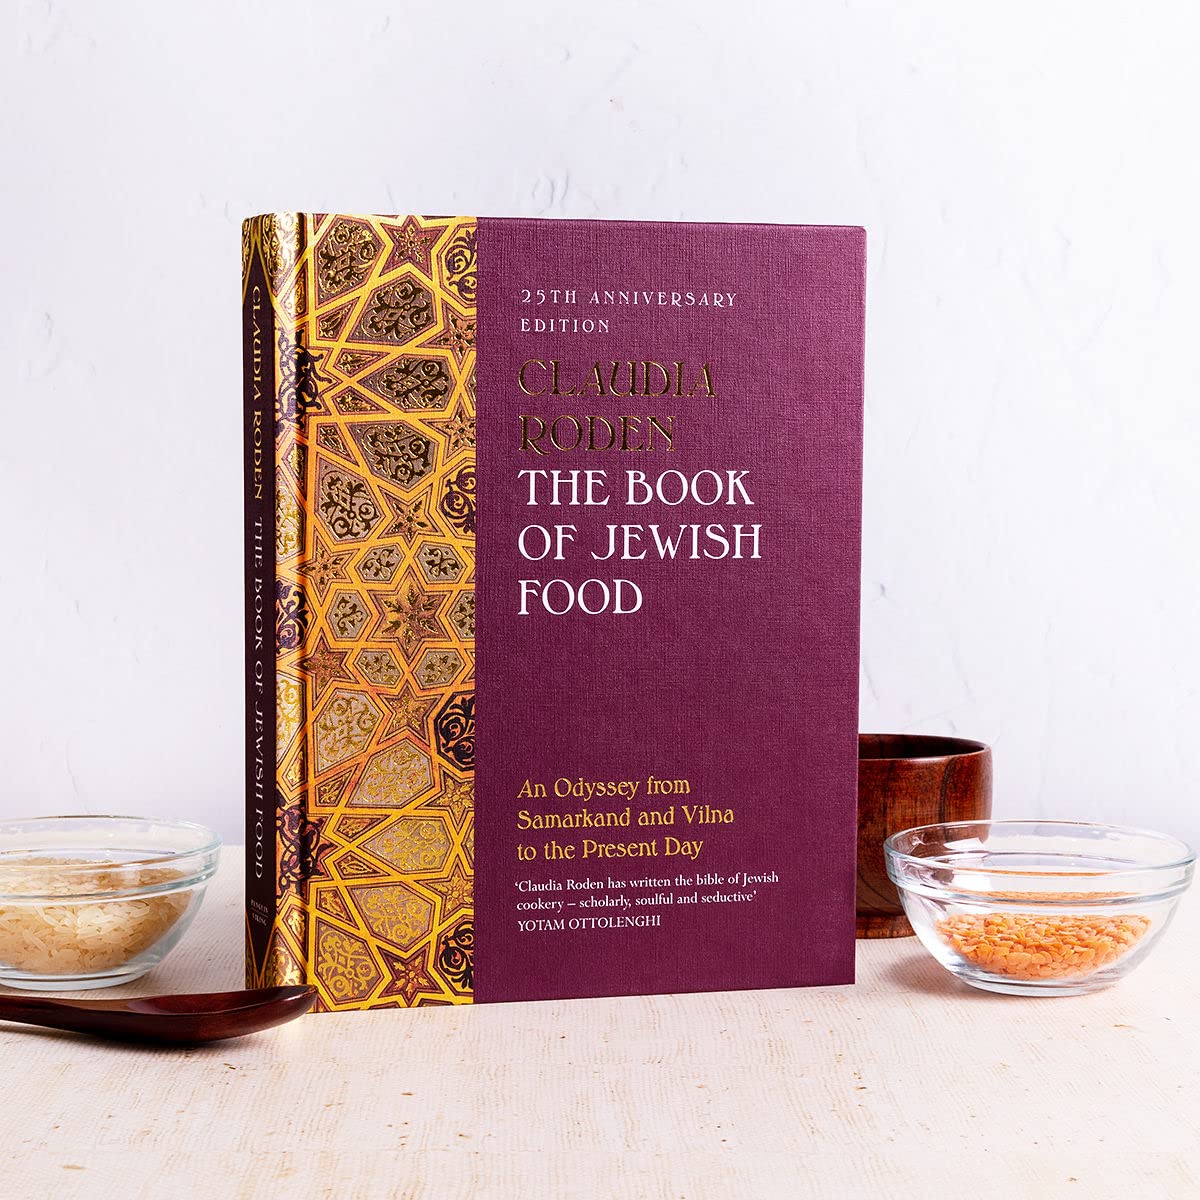 The Book of Jewish Food by Claudia Roden